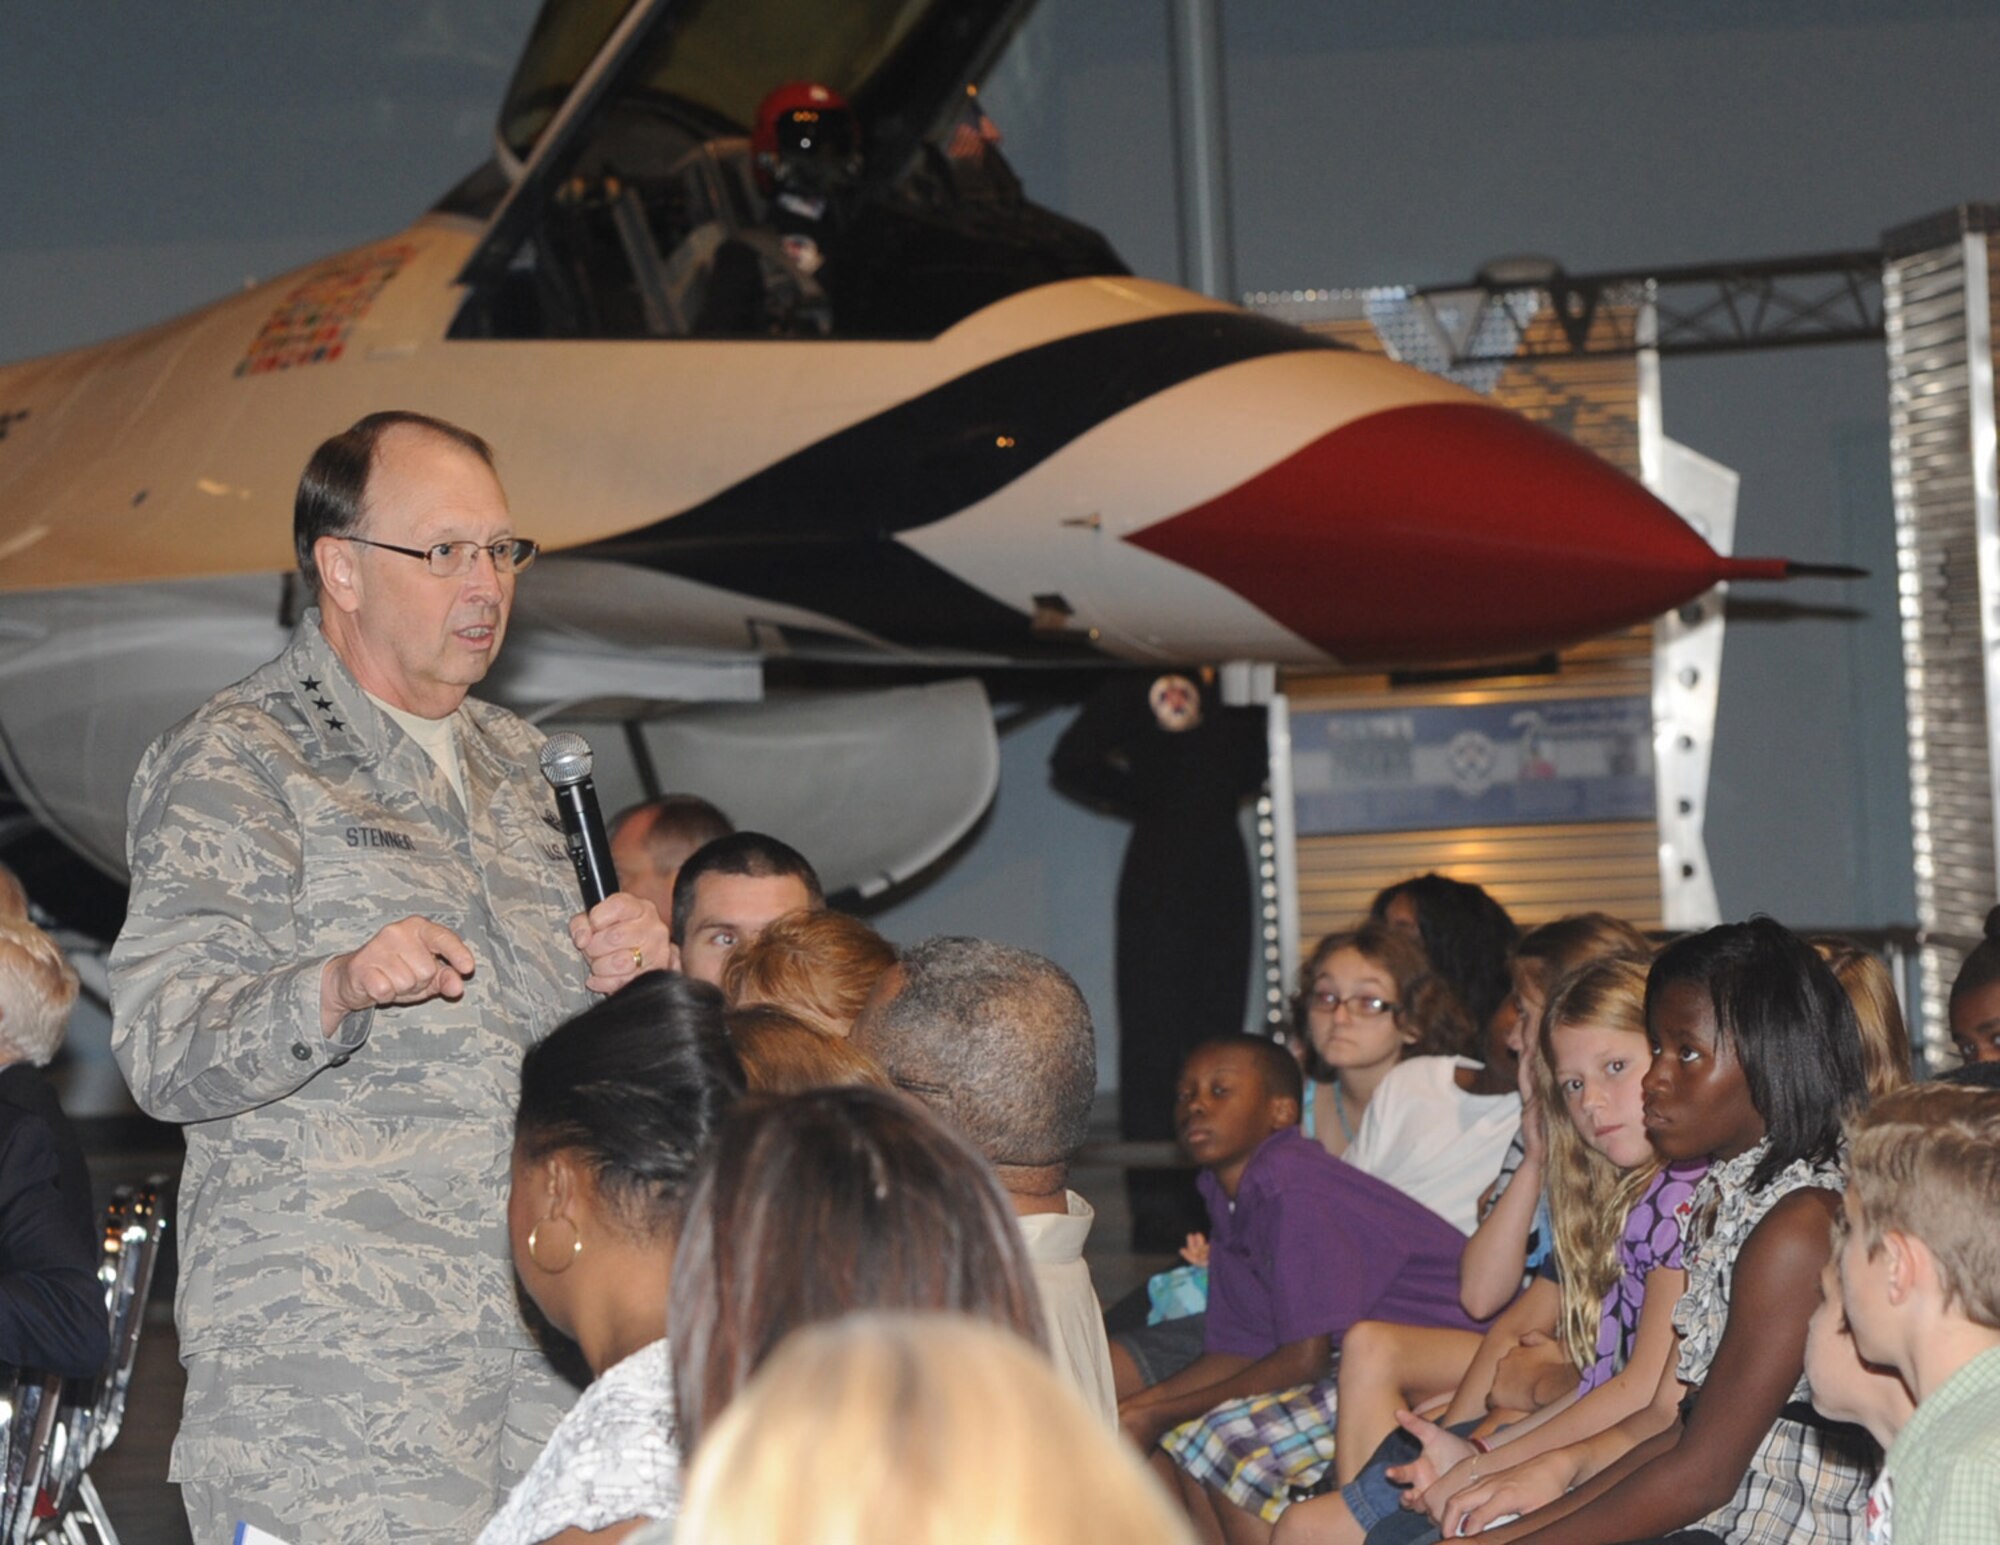 Lt. Gen. Charles E. Stenner Jr., commander of Air Force Reserve Command at Robins Air Force Base, Ga., speaks to fifth graders from the Centerville (Ga.) Elementary School about his former "office" in the cockpit of an F-16.  A Thunderbird F-16 is in the background behind the general. The AFRC commander and Tony Gonzales, director of STARBASE for the Office of the Assistant Secretary of Defense for Reserve Affairs, were guest speakers at STARBASE Robins' 15th anniversary ceremony Sept. 2, 2011. STARBASE is a Department of Defense program begun in 1989 to raise the interest and improve knowledge and skills of students in kindergarten through 12th grade in science, technology, engineering and mathematics. (U.S. Air Force photo/Raymond Clayton Jr.)